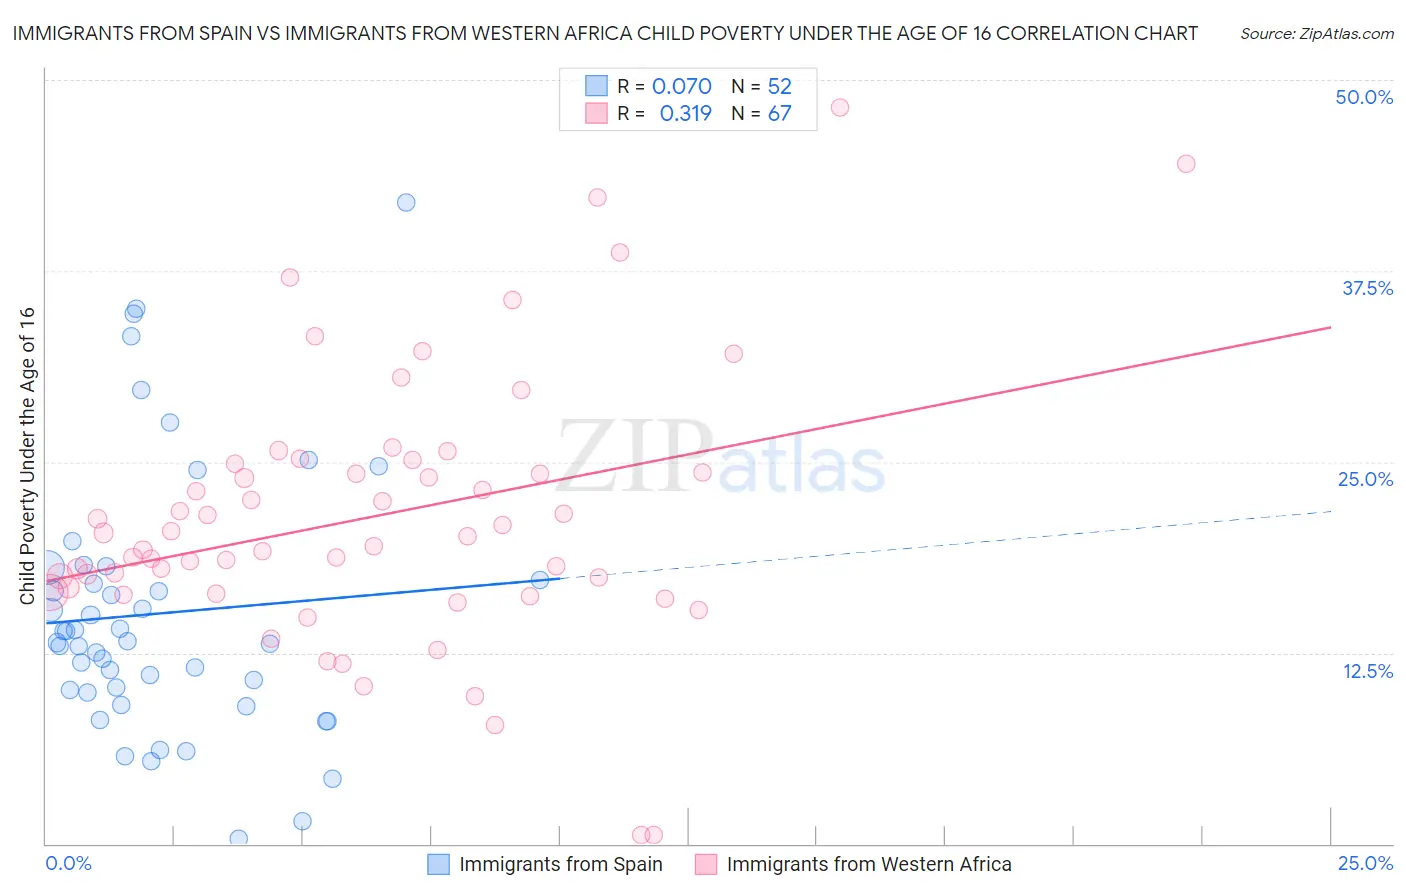 Immigrants from Spain vs Immigrants from Western Africa Child Poverty Under the Age of 16